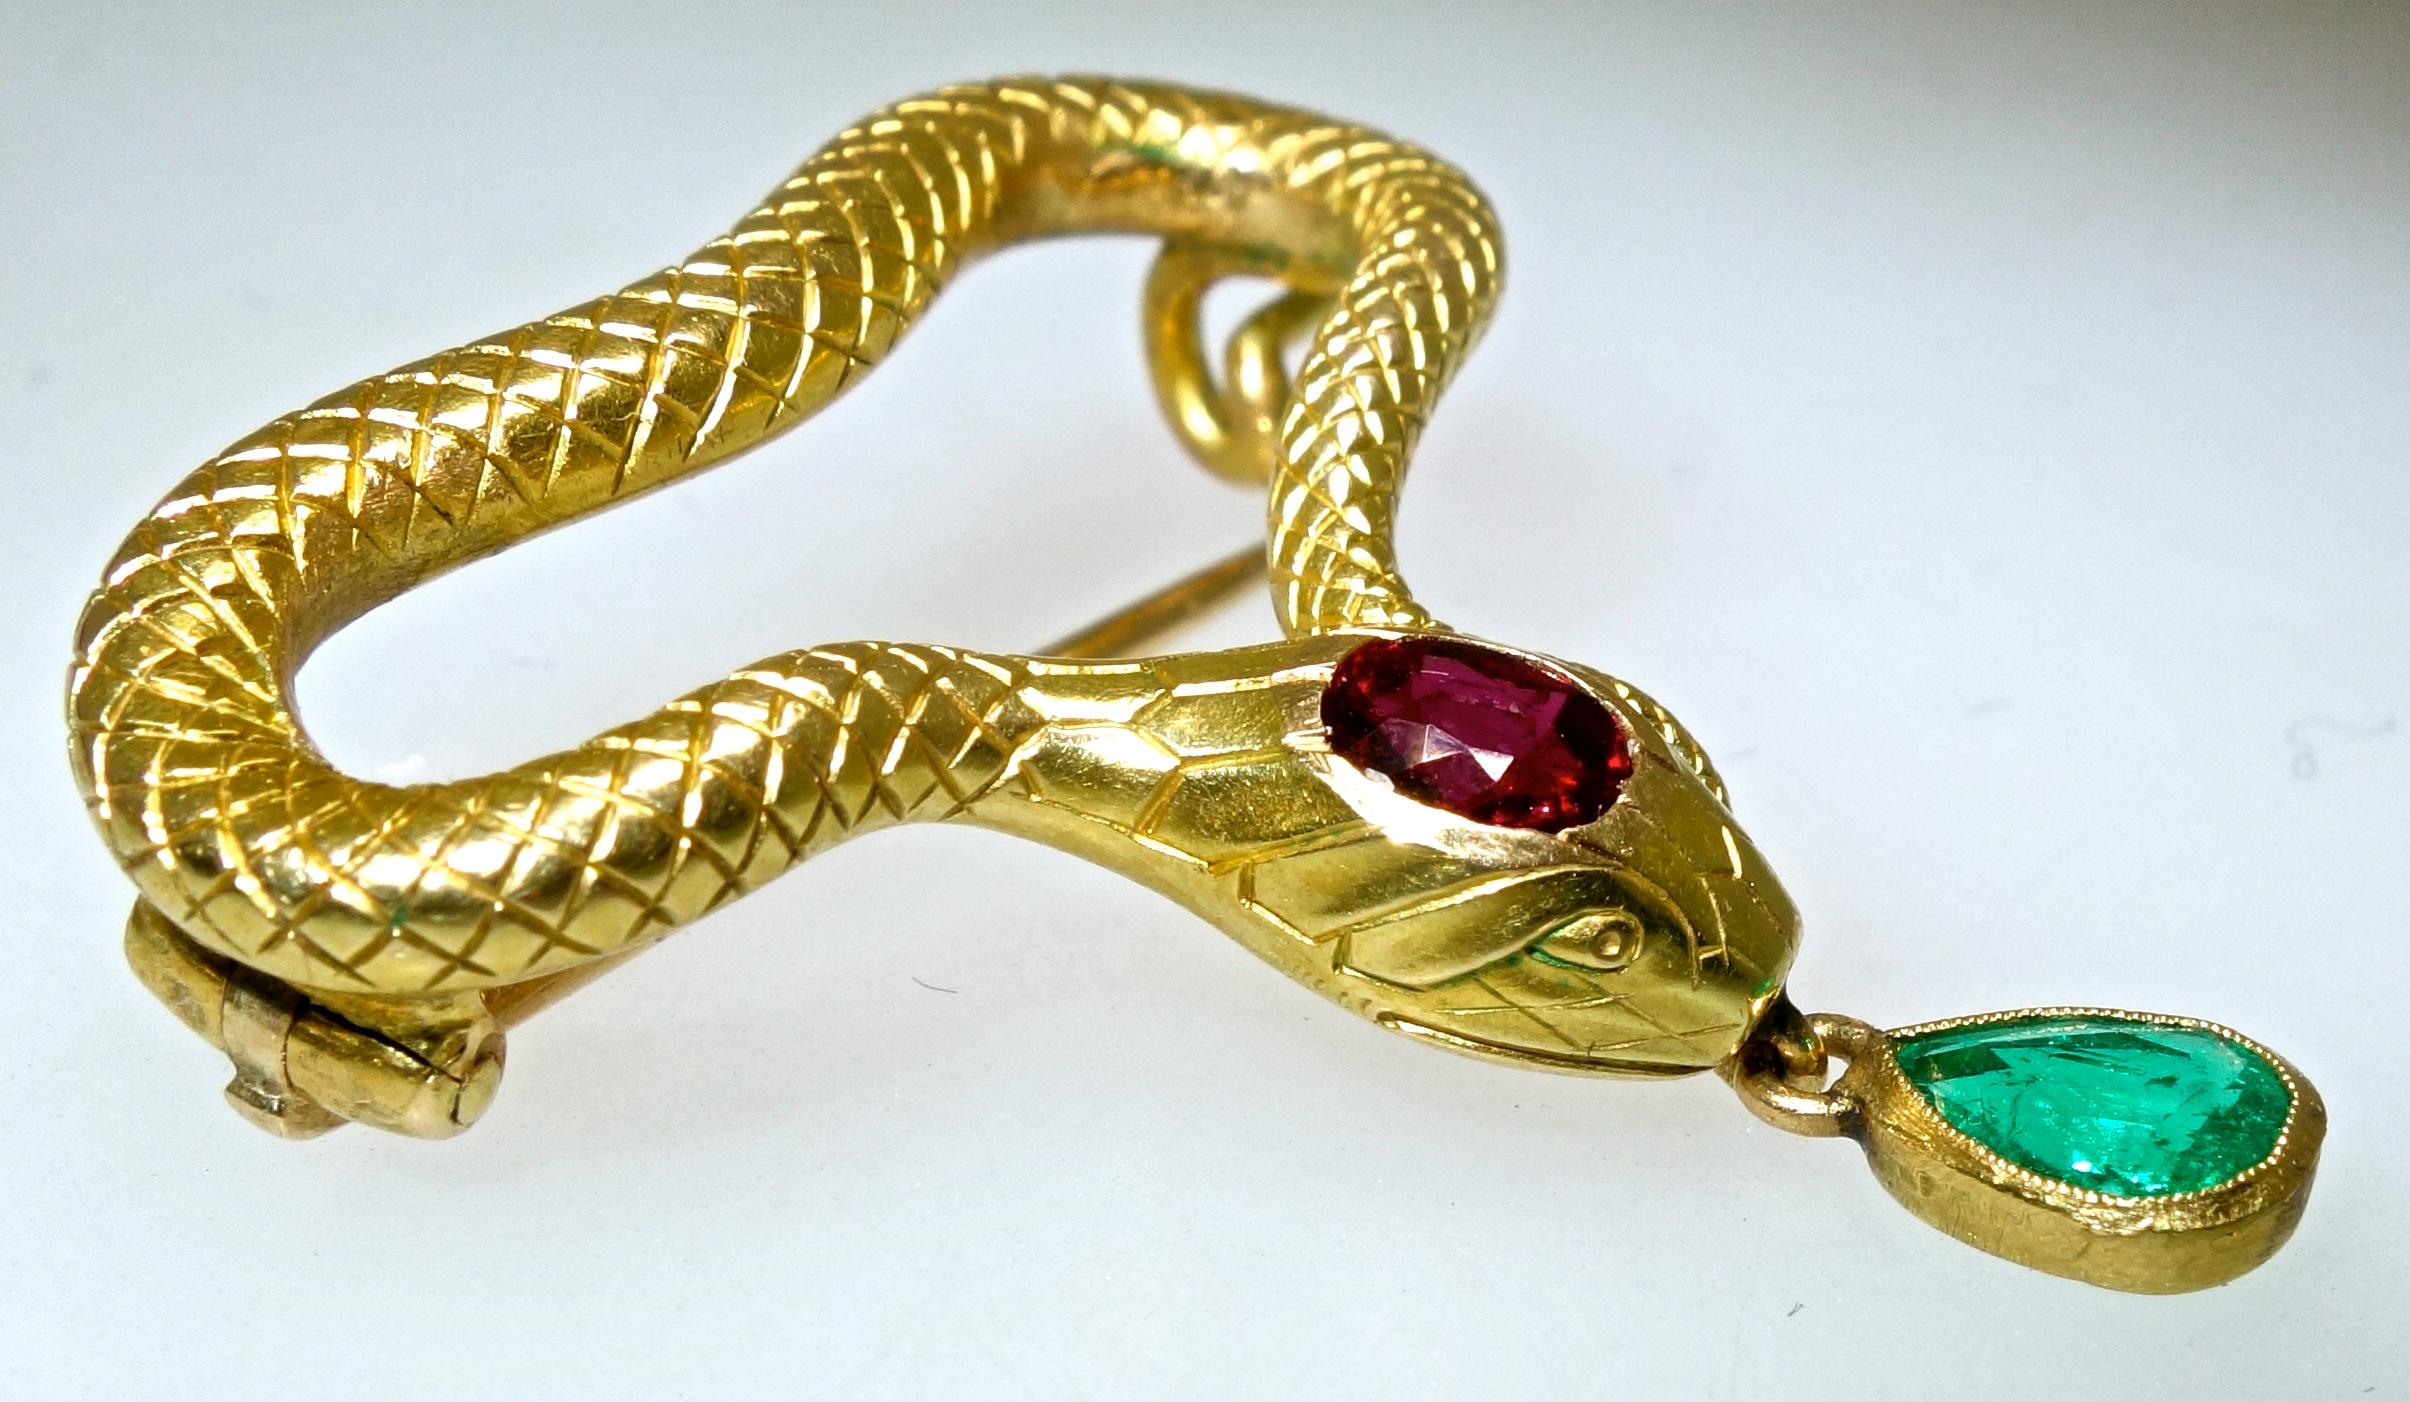 Faberge gold, ruby and emerald serpent brooch, the authentic marks on the verso for K. Faberge, Moscow, and 56 for the gold mark.  This serpent has a Colombian pear cut emerald suspended from his mouth, weighing approximately .33 cts., and a Burma